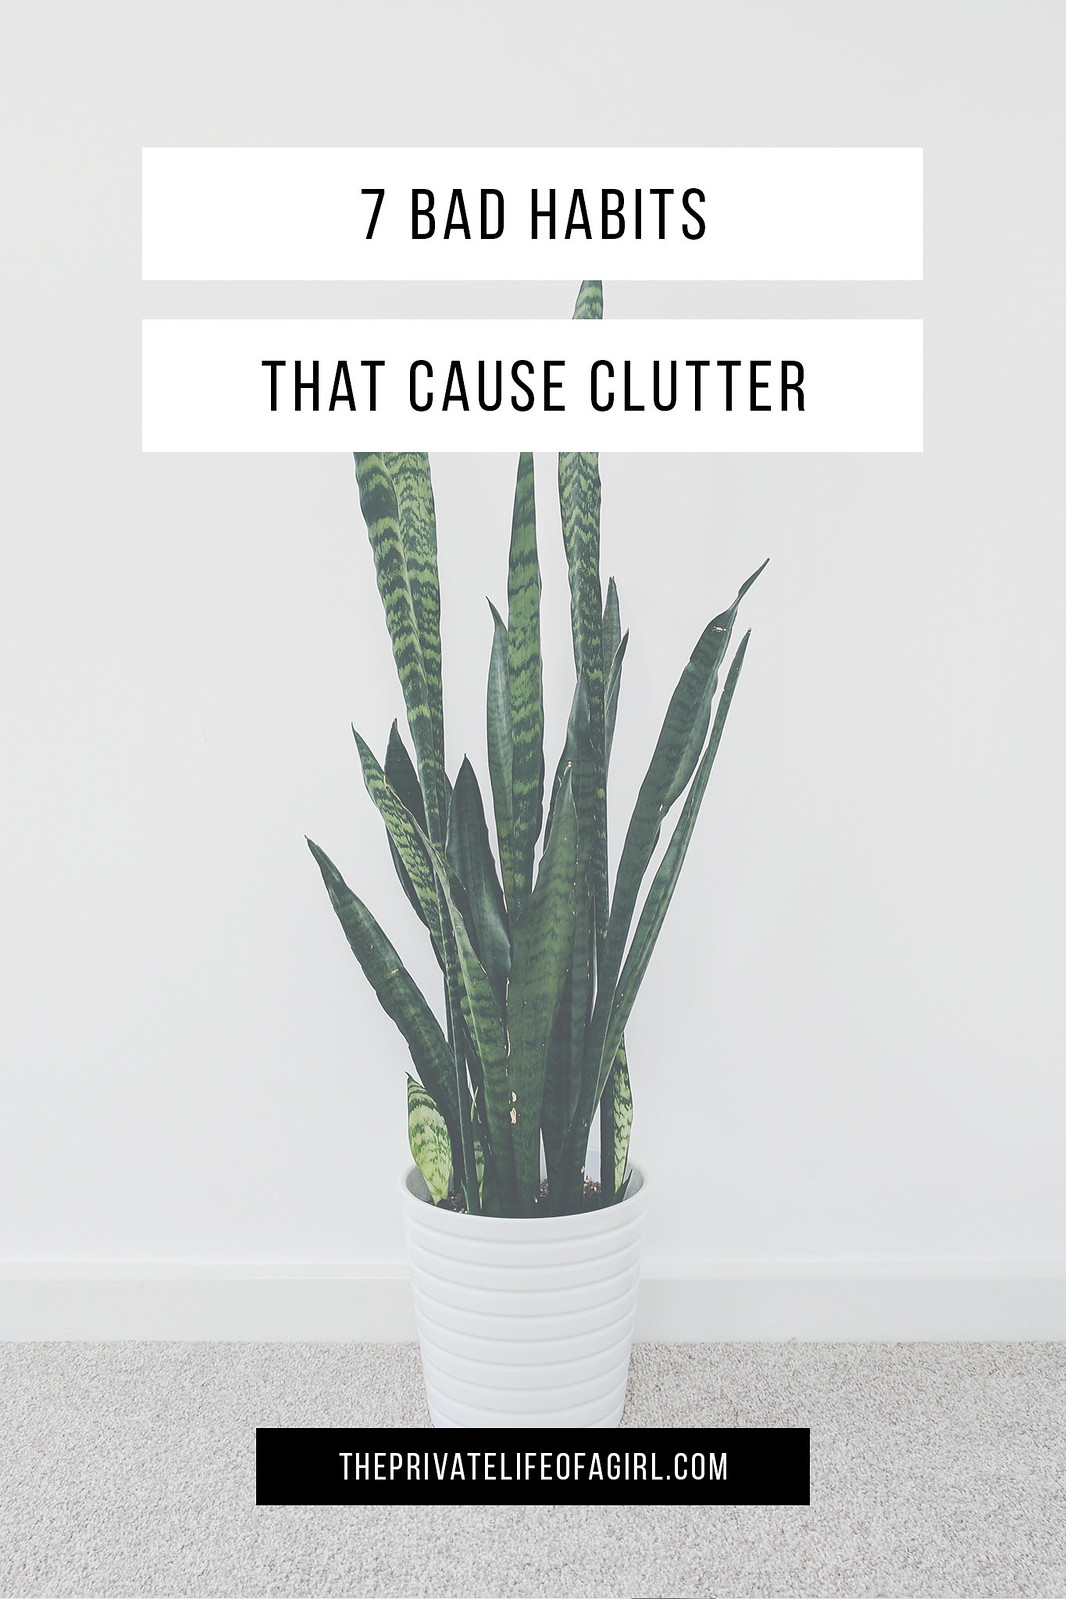 The 7 Bad Habits That Cause Clutter